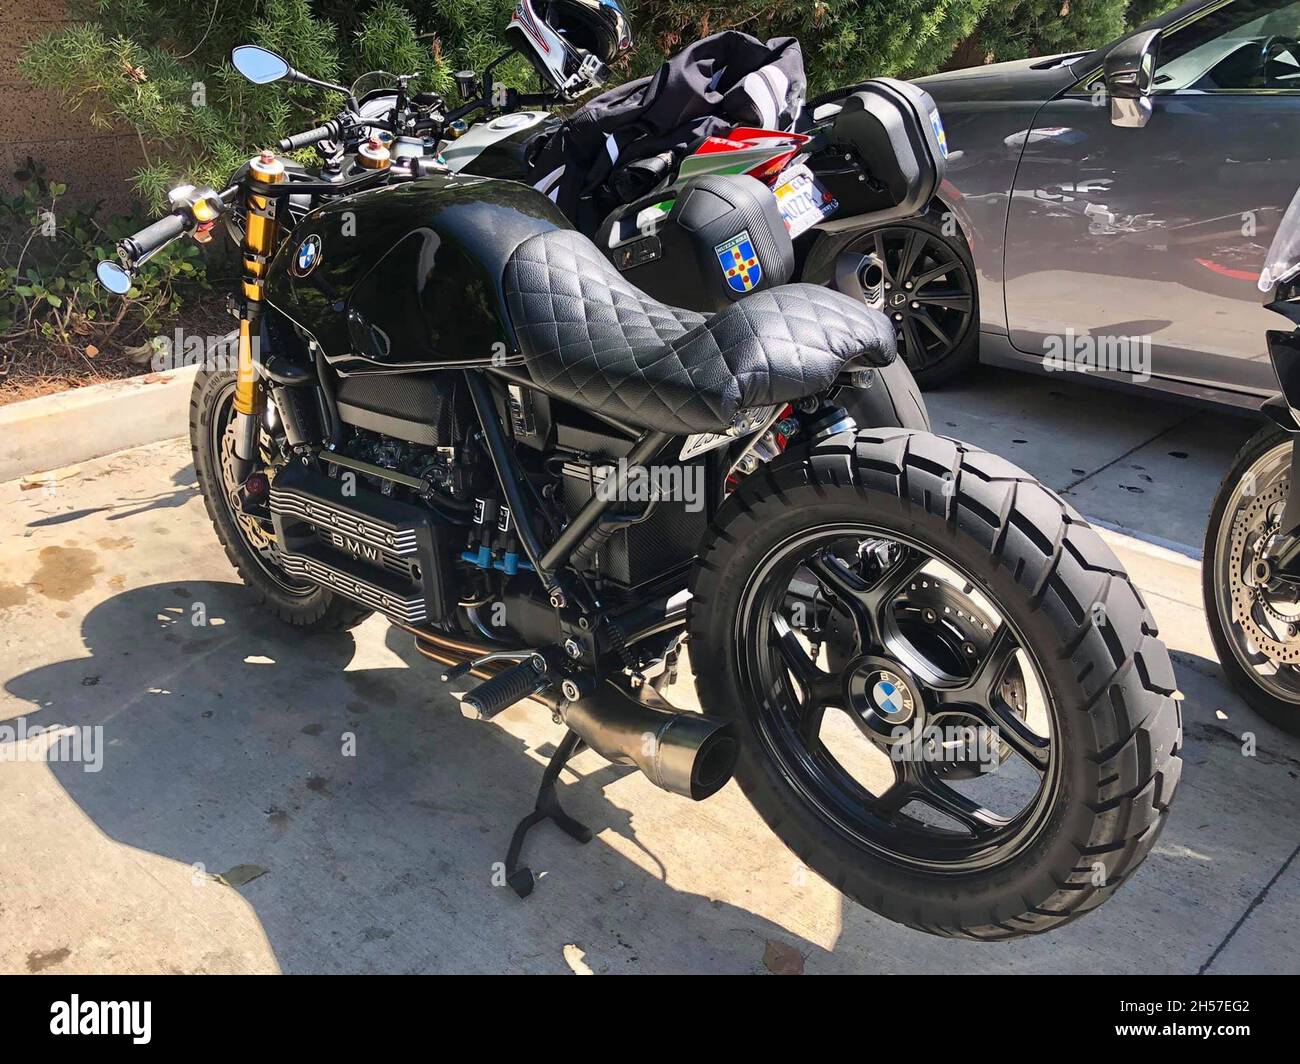 Old, customized BMW motorcycle . Parked next to other motorcycles. Los Angeles, United States. Stock Photo